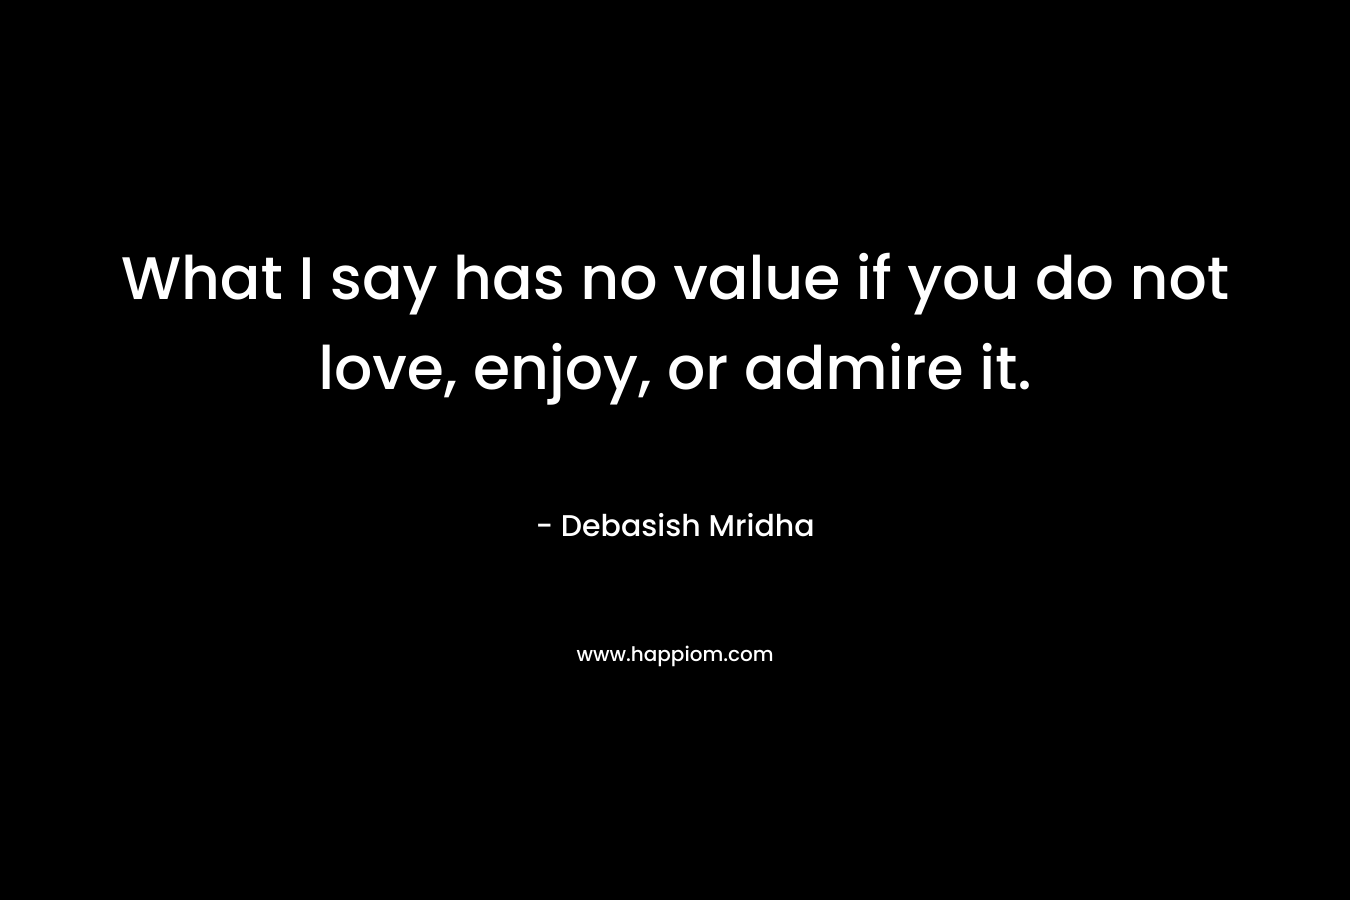 What I say has no value if you do not love, enjoy, or admire it. – Debasish Mridha